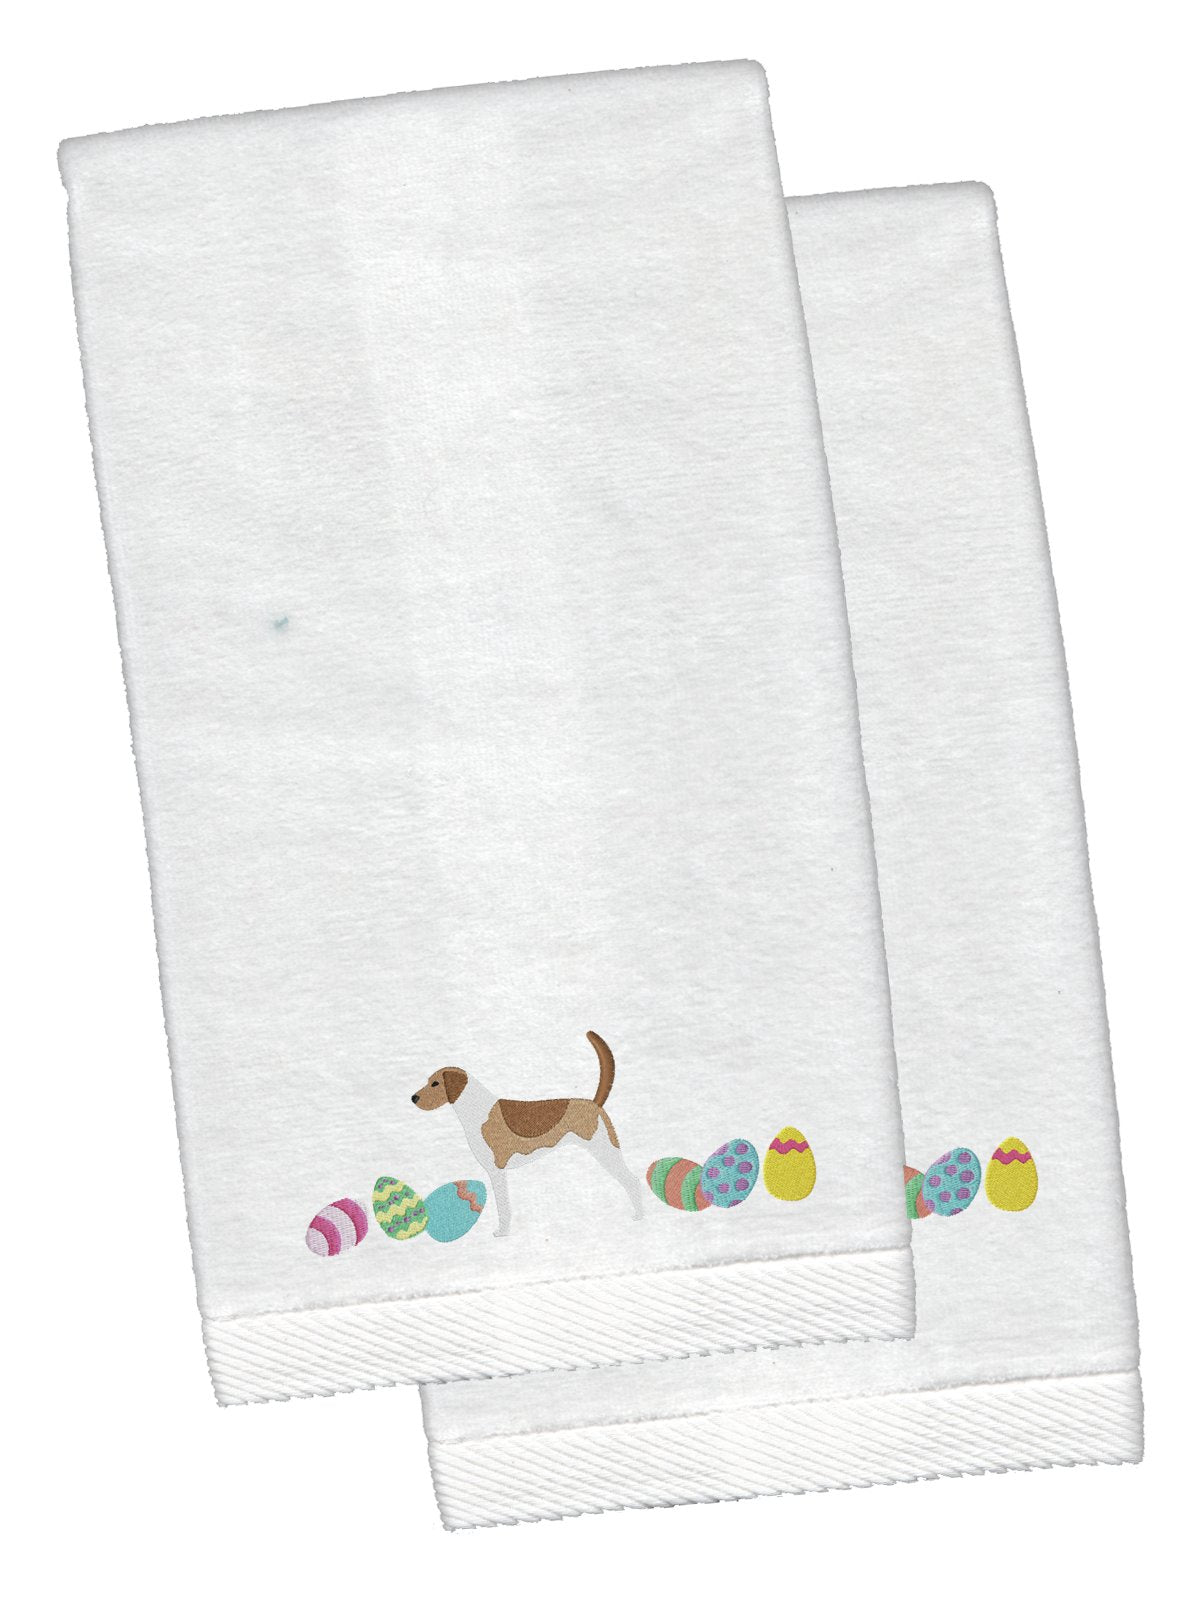 American Foxhound Easter White Embroidered Plush Hand Towel Set of 2 CK1596KTEMB by Caroline's Treasures